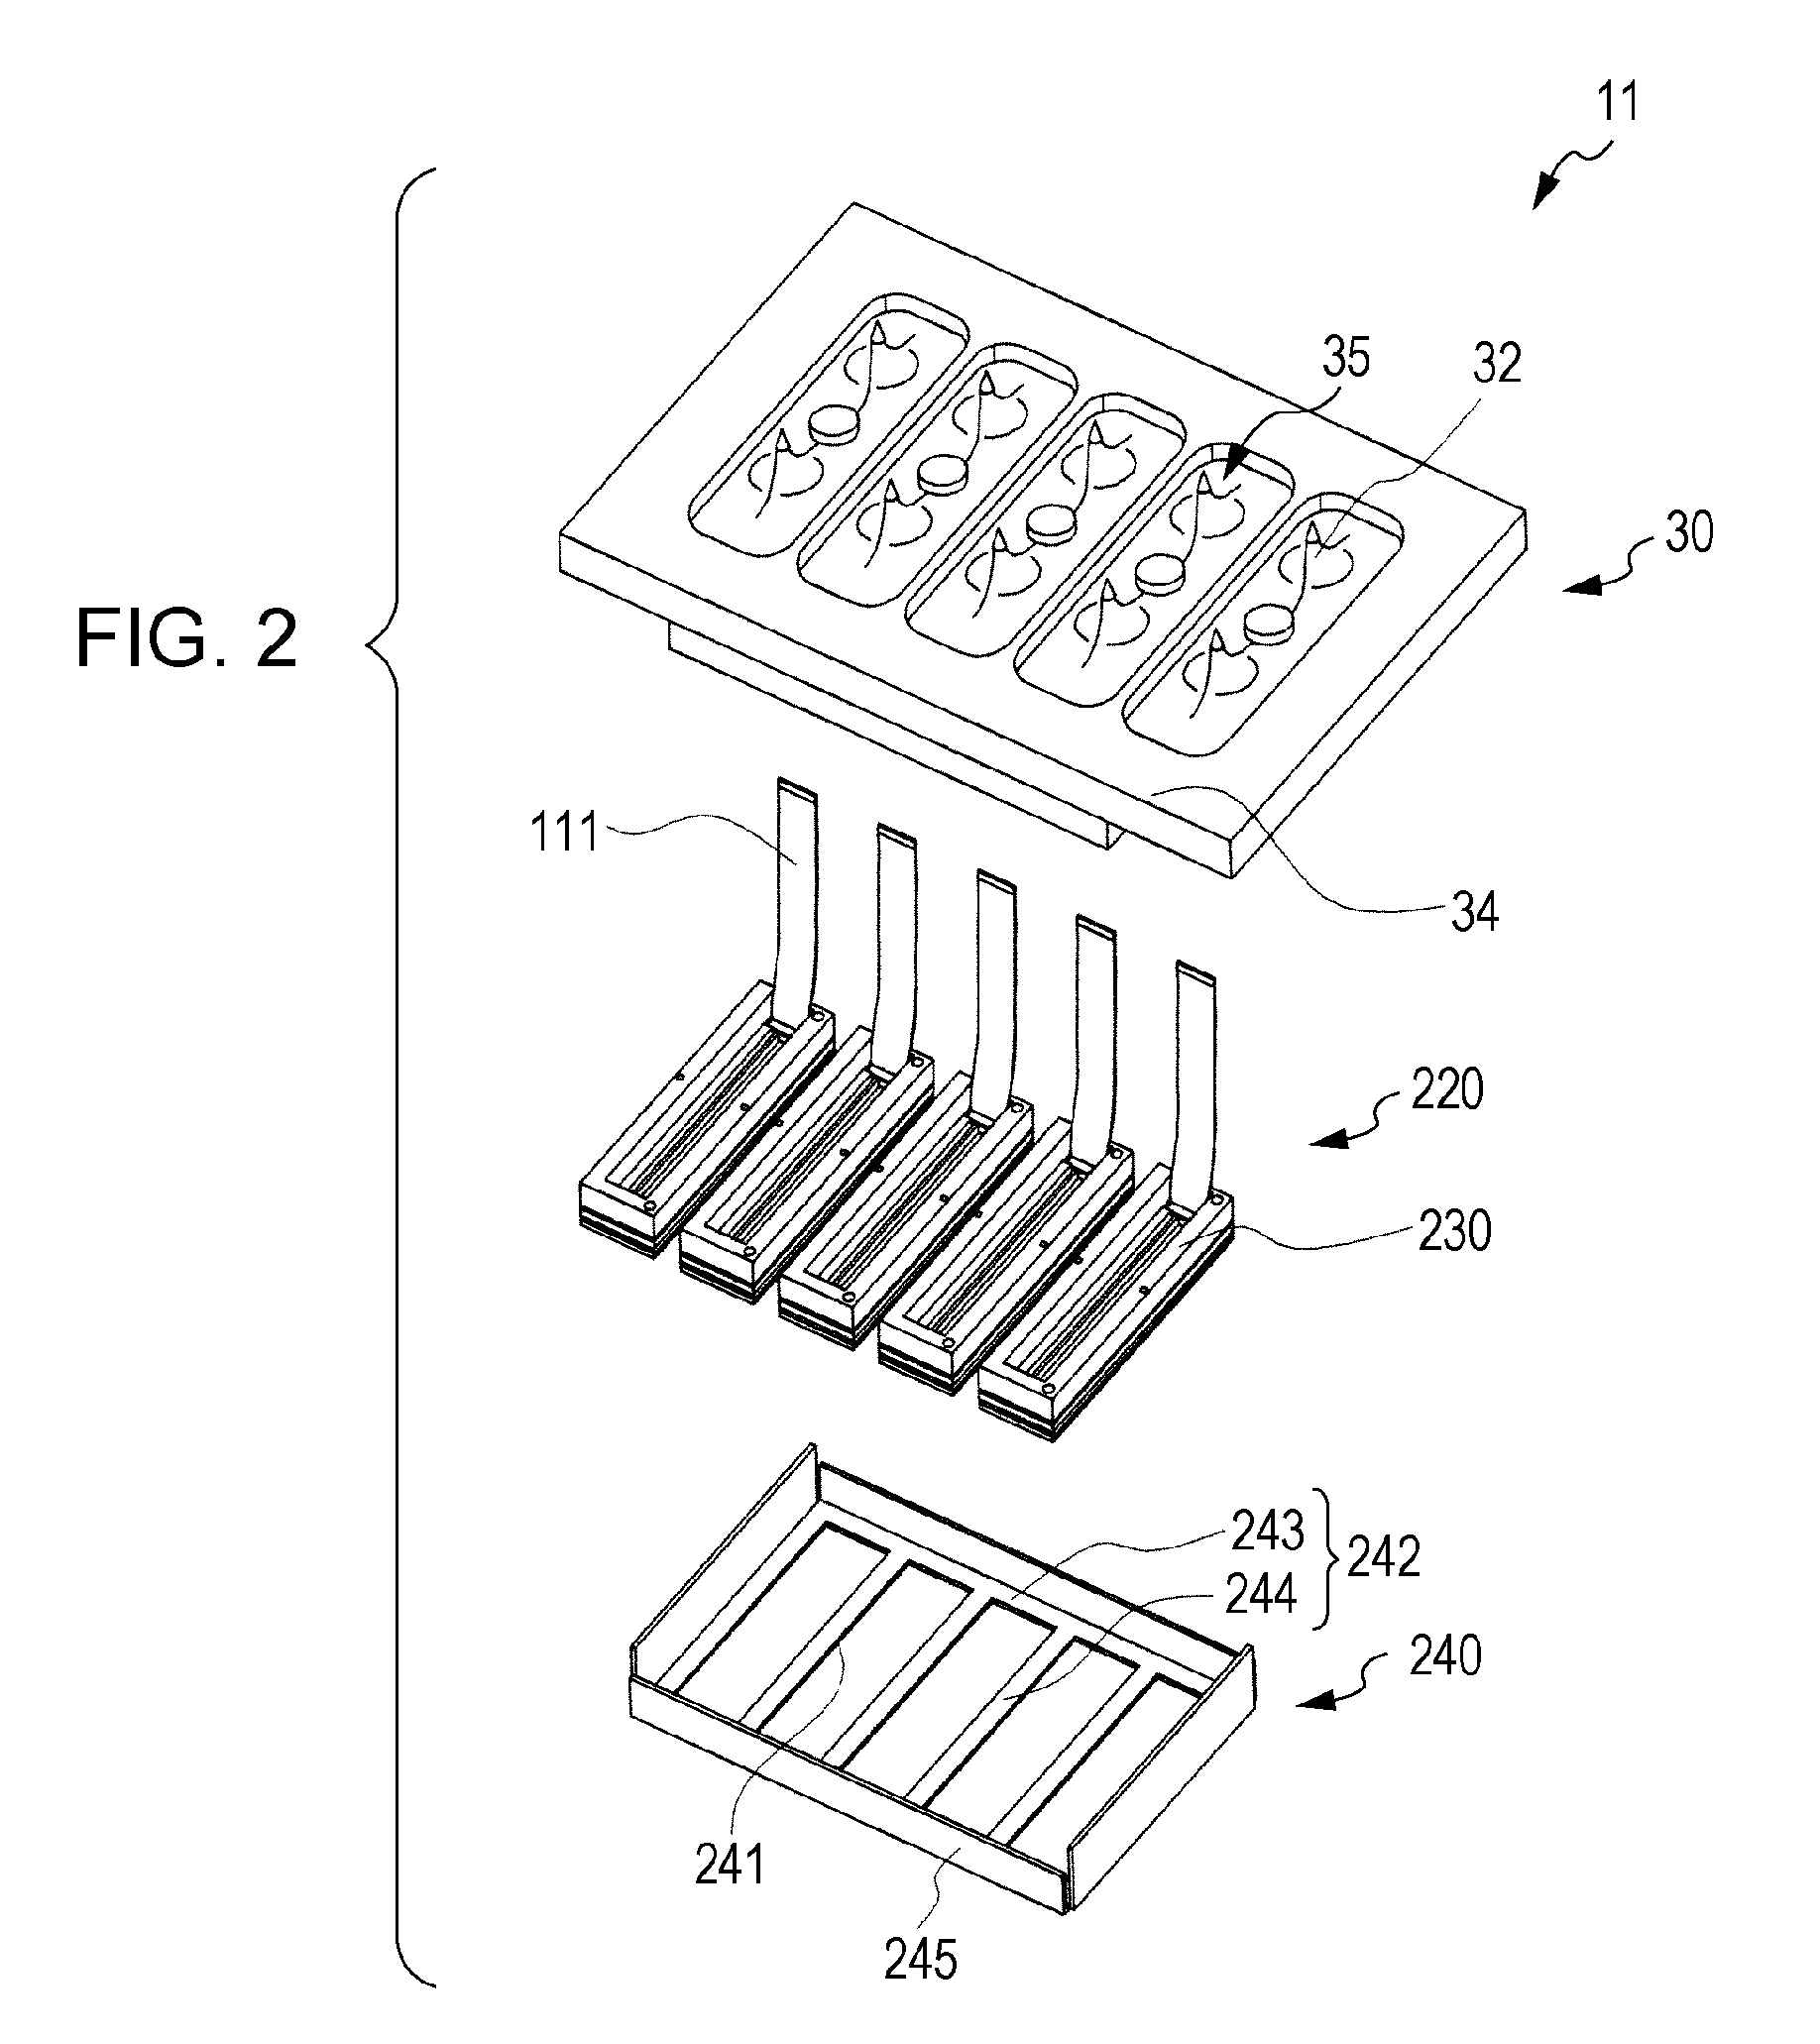 Liquid ejection head, method for manufactuirng the same, and liquid ejecting apparatus